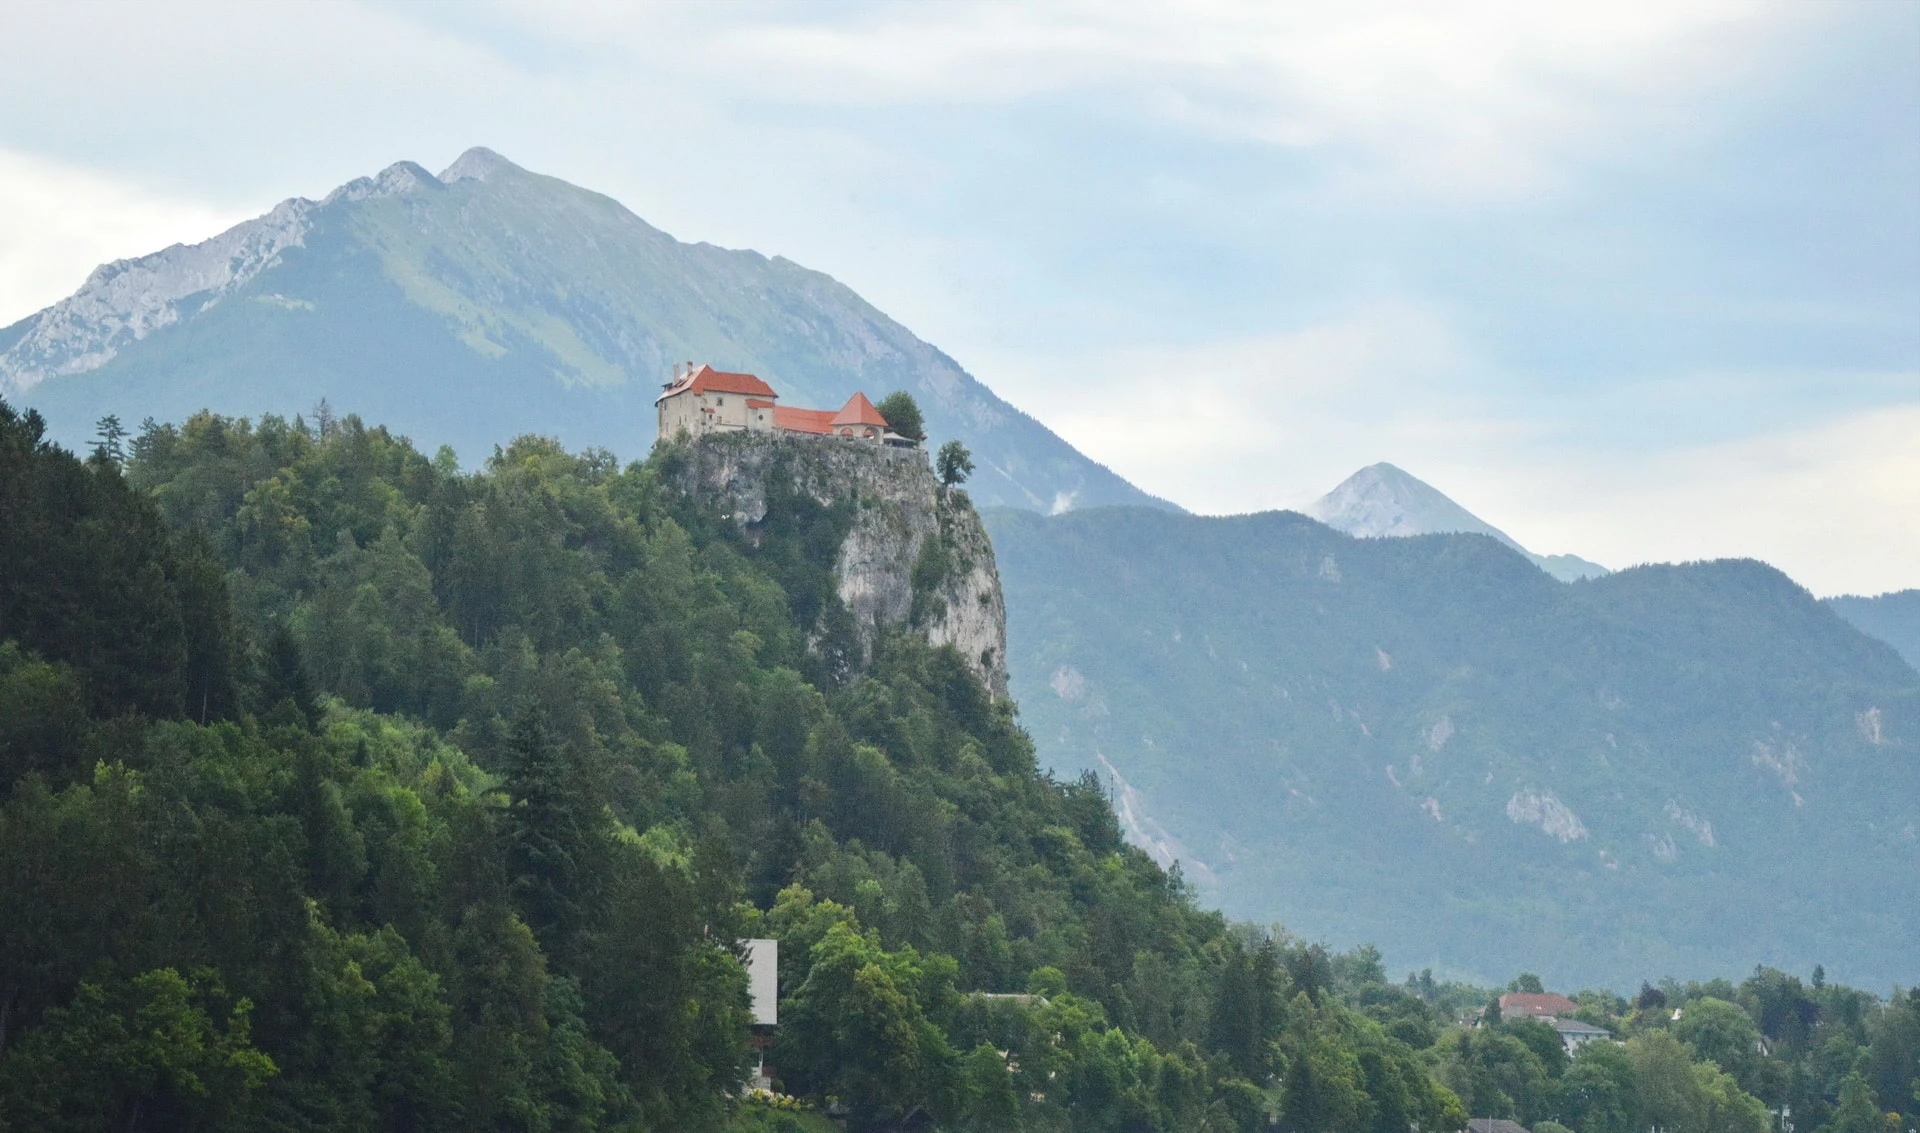 The Bled Castle, looking from the Ojstrica viewpoint